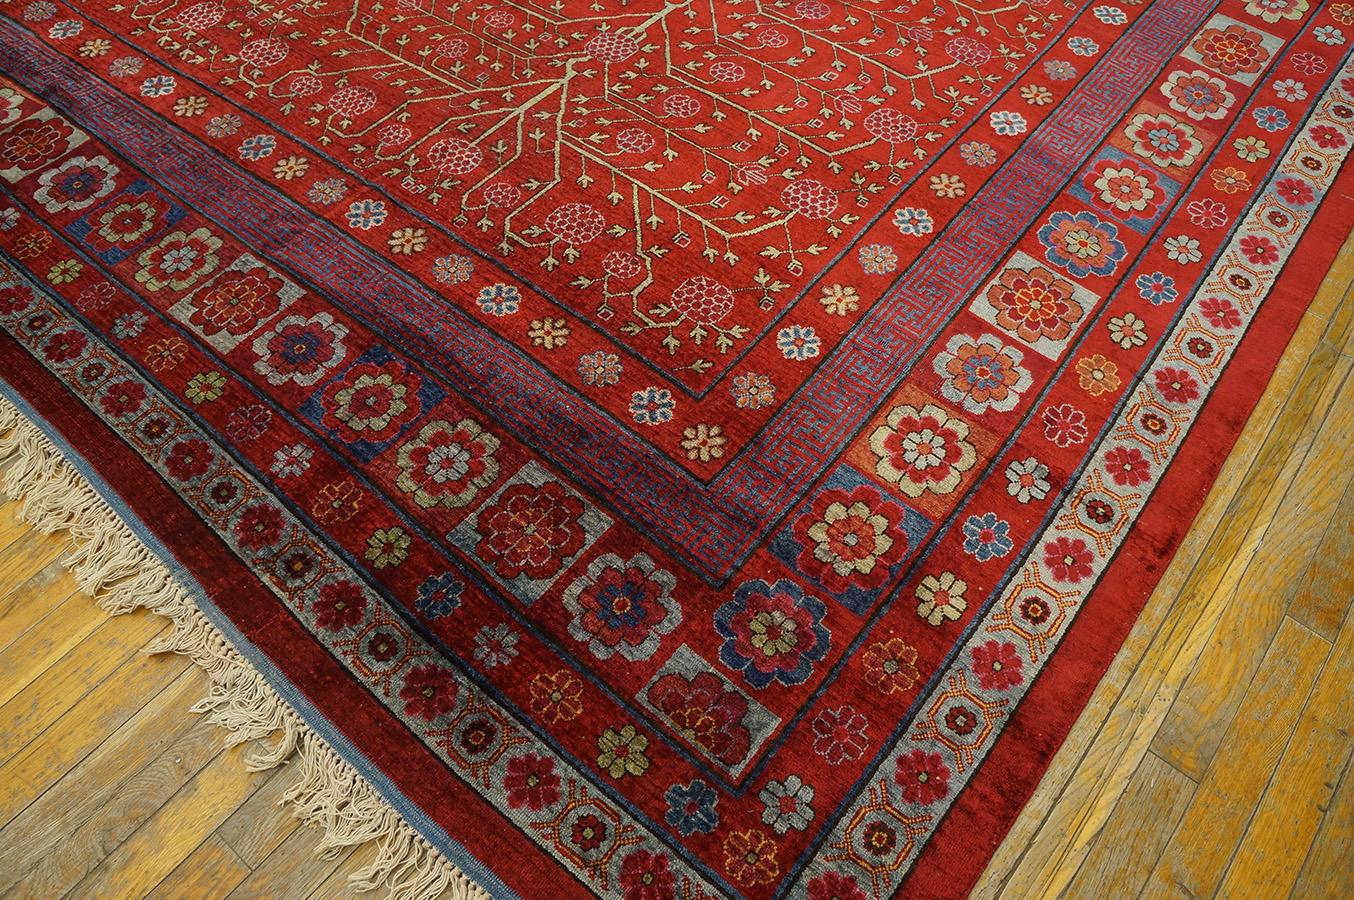 Early 19th Century Central Asian Chinese Khotan Silk Carpet For Sale 6